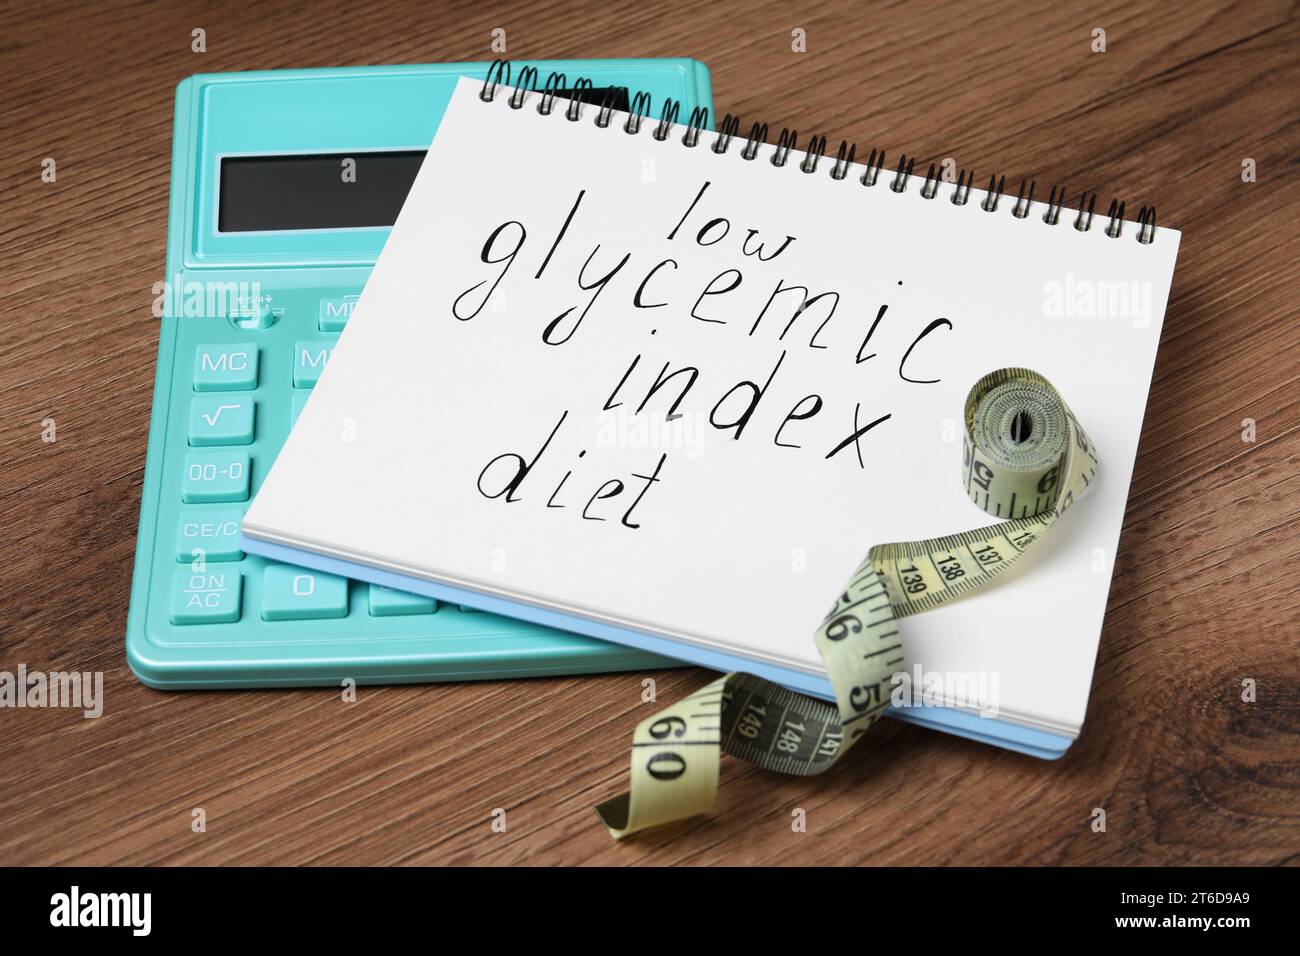 Notebook with words Low Glycemic Index Diet, measuring tape and calculator on wooden table Stock Photo